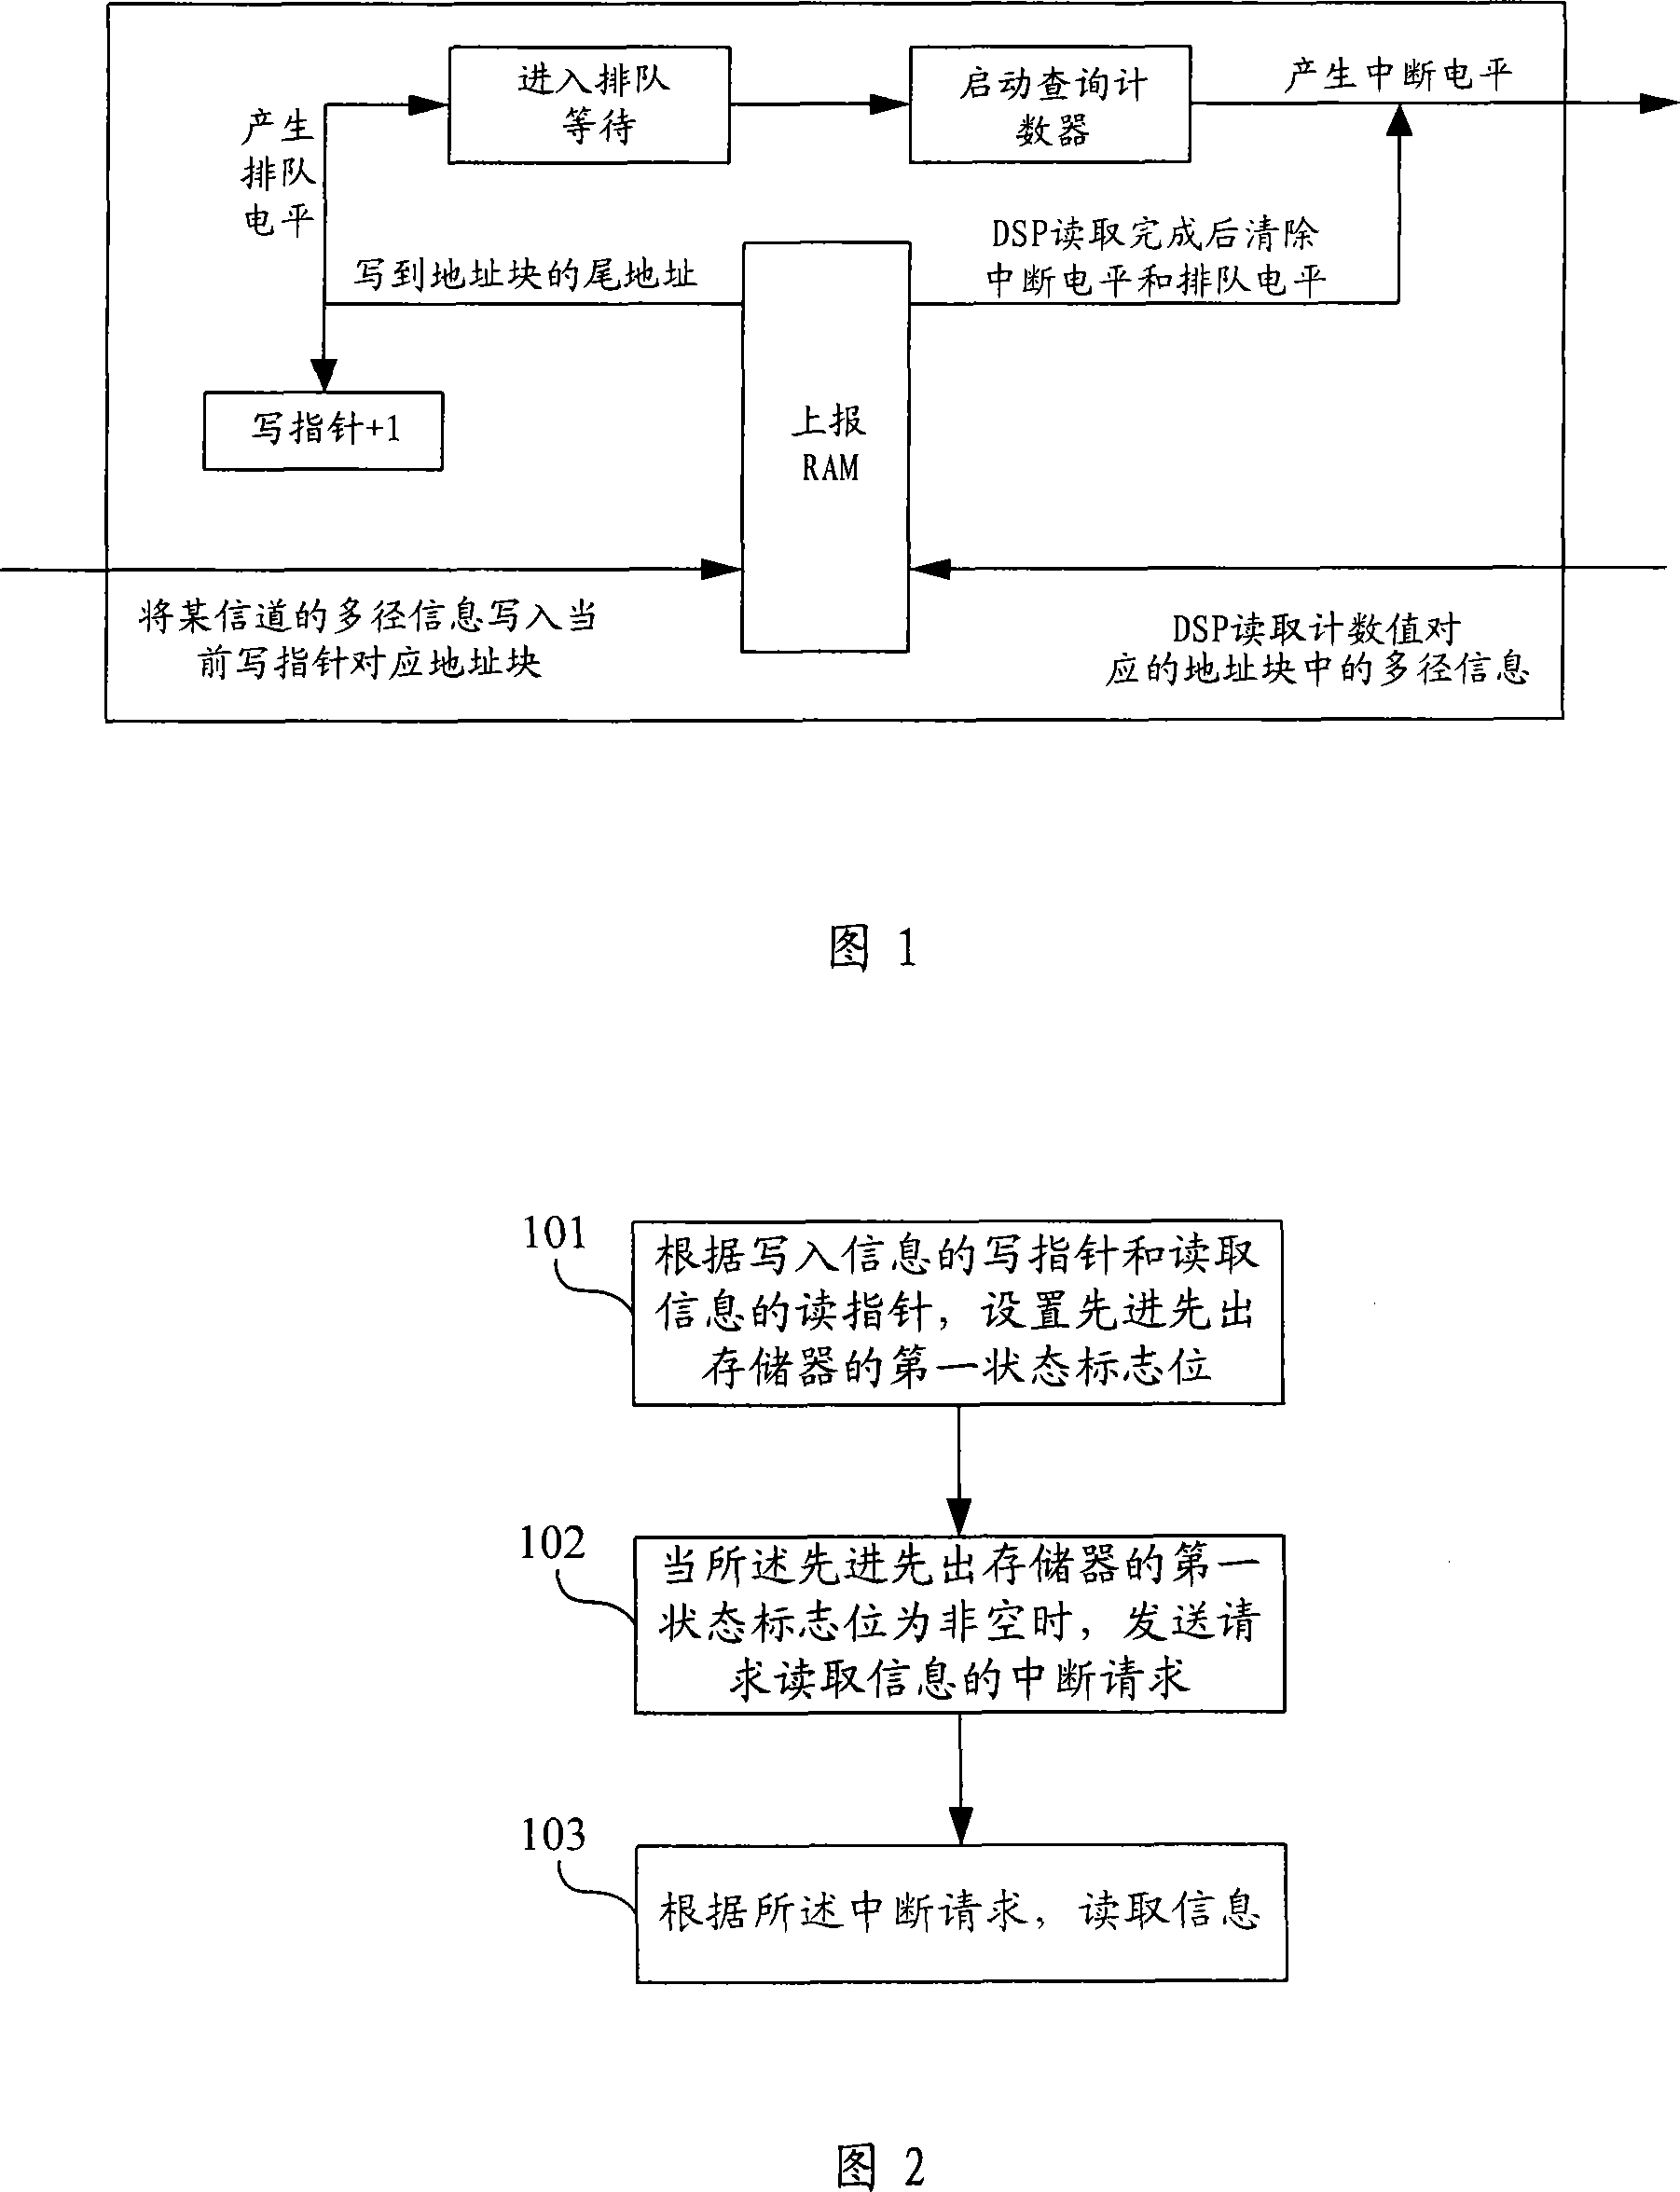 Method and apparatus for reporting information